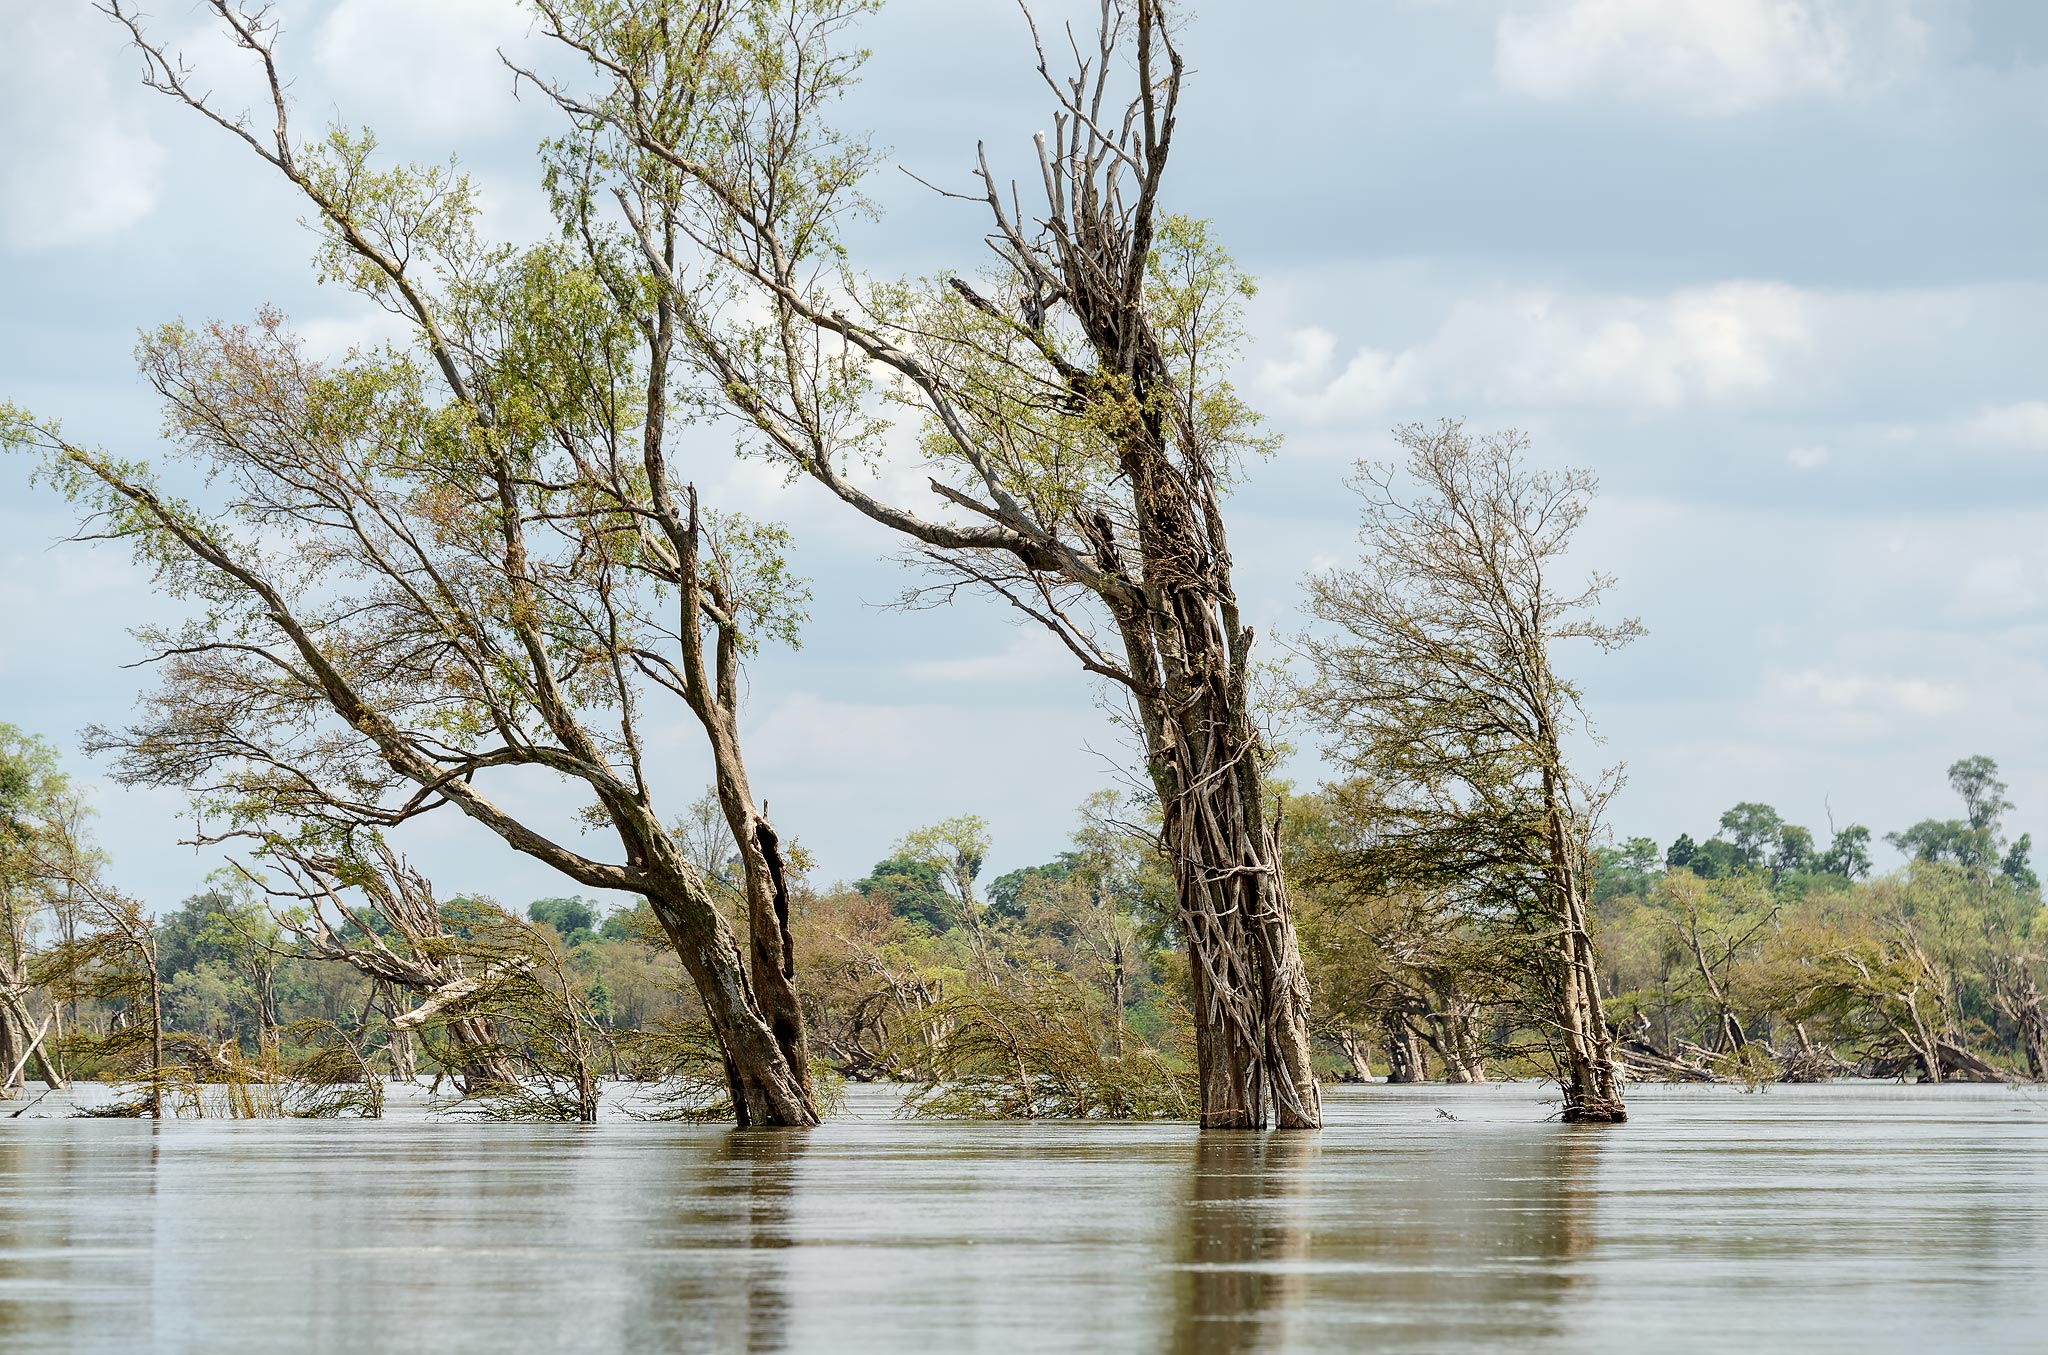 Flooded forests of the Mekong, Cambodia